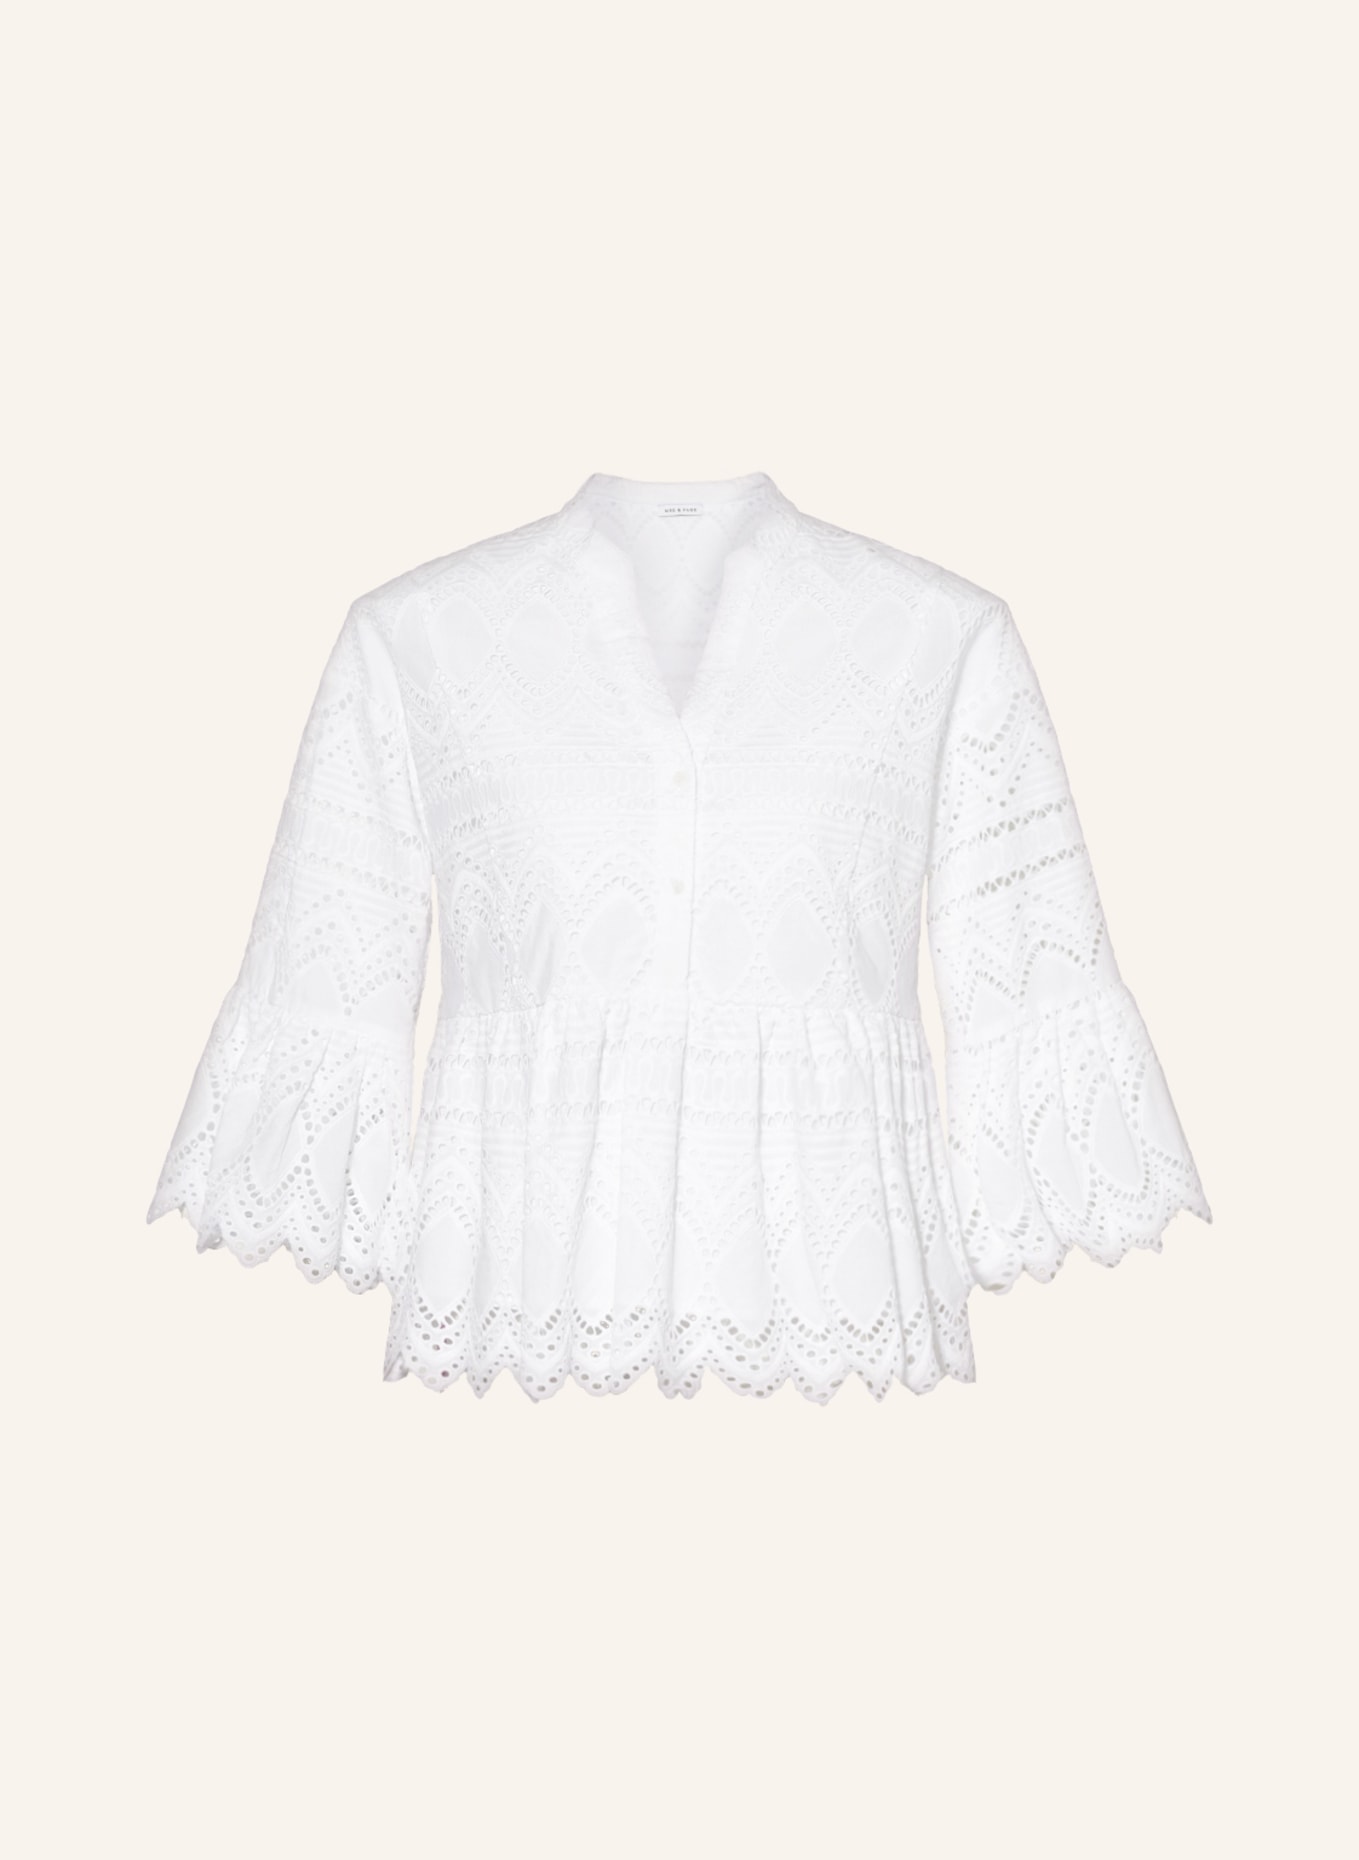 MRS & HUGS Shirt blouse made of lace, Color: WHITE (Image 1)